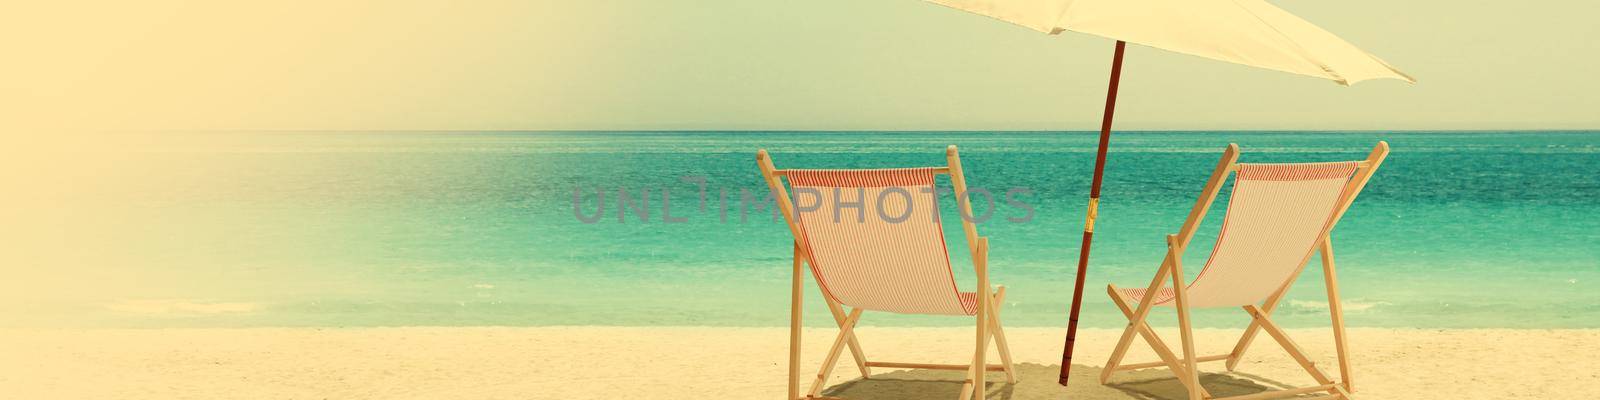 Relax on tropical beach in the sun on deck chairs. by Taut